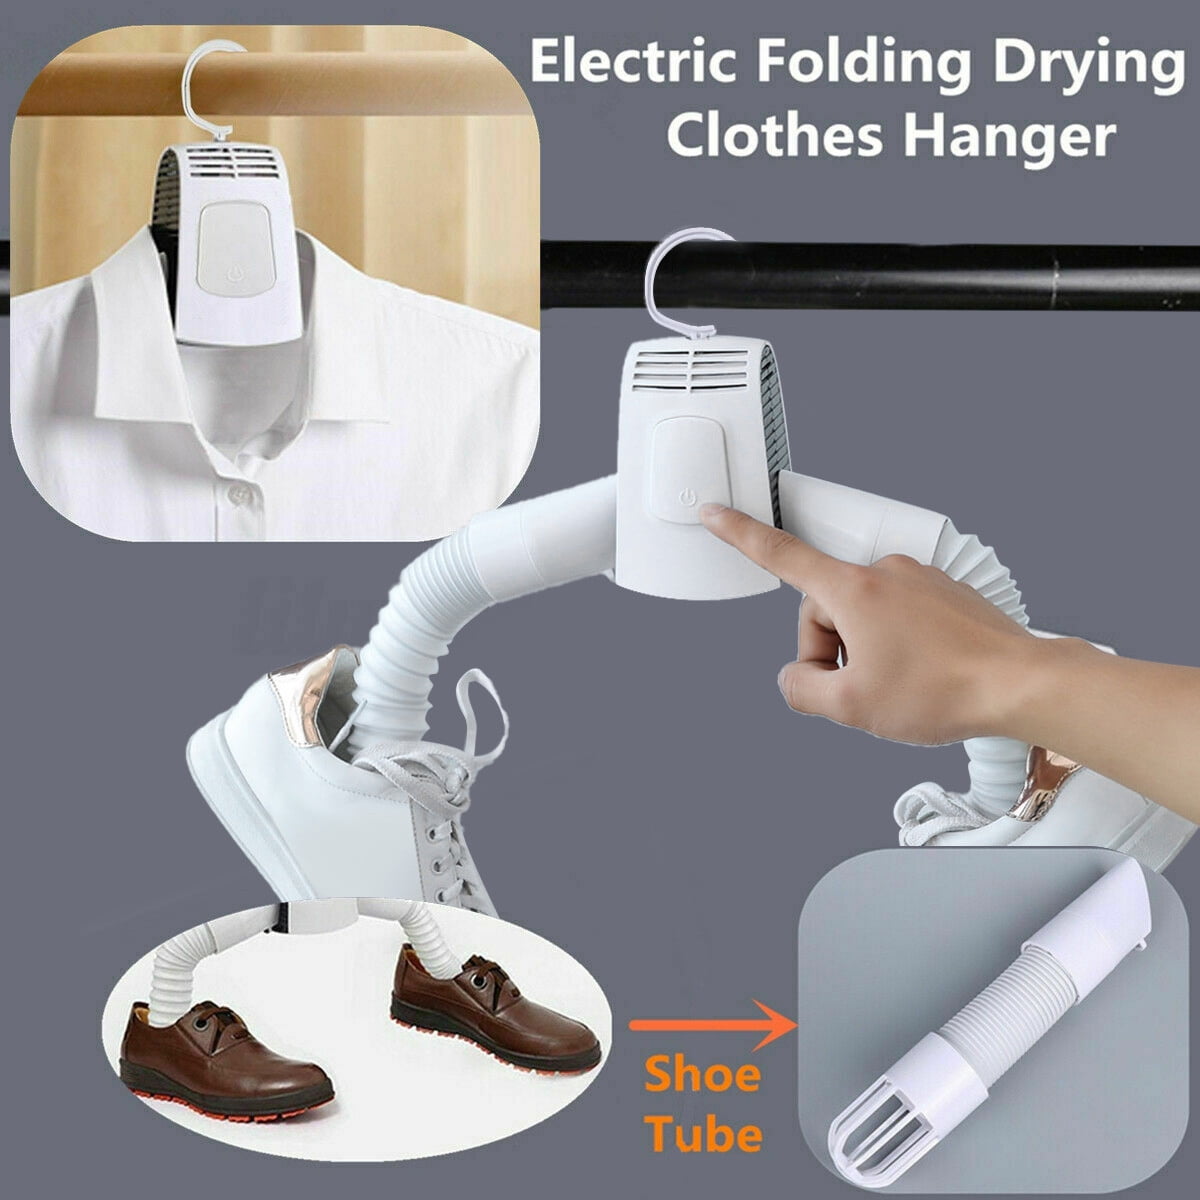 Portable Electric Folding Clothes Hanger Shoes Dryer Travel Laundry Drying Rack 